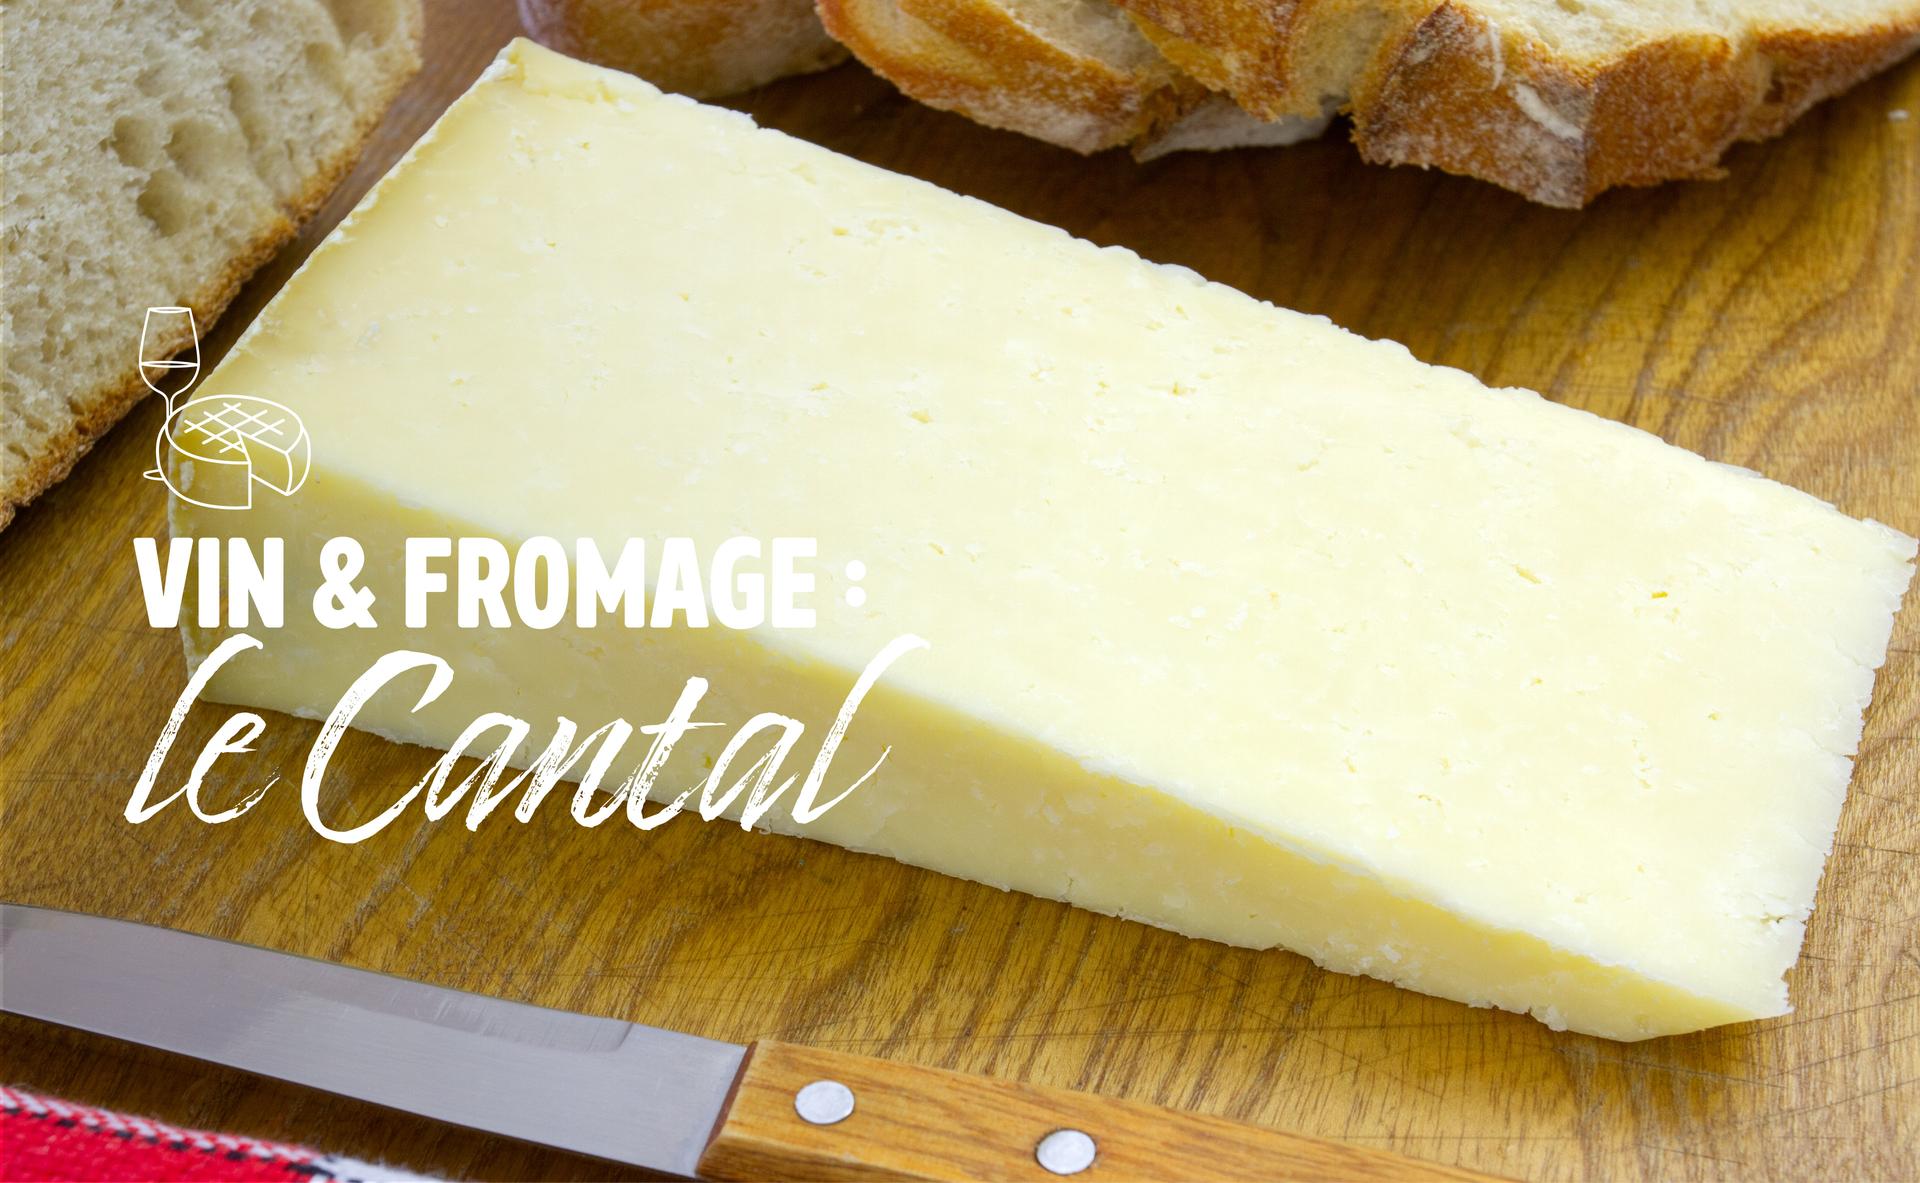 Vin & fromage : le Cantal